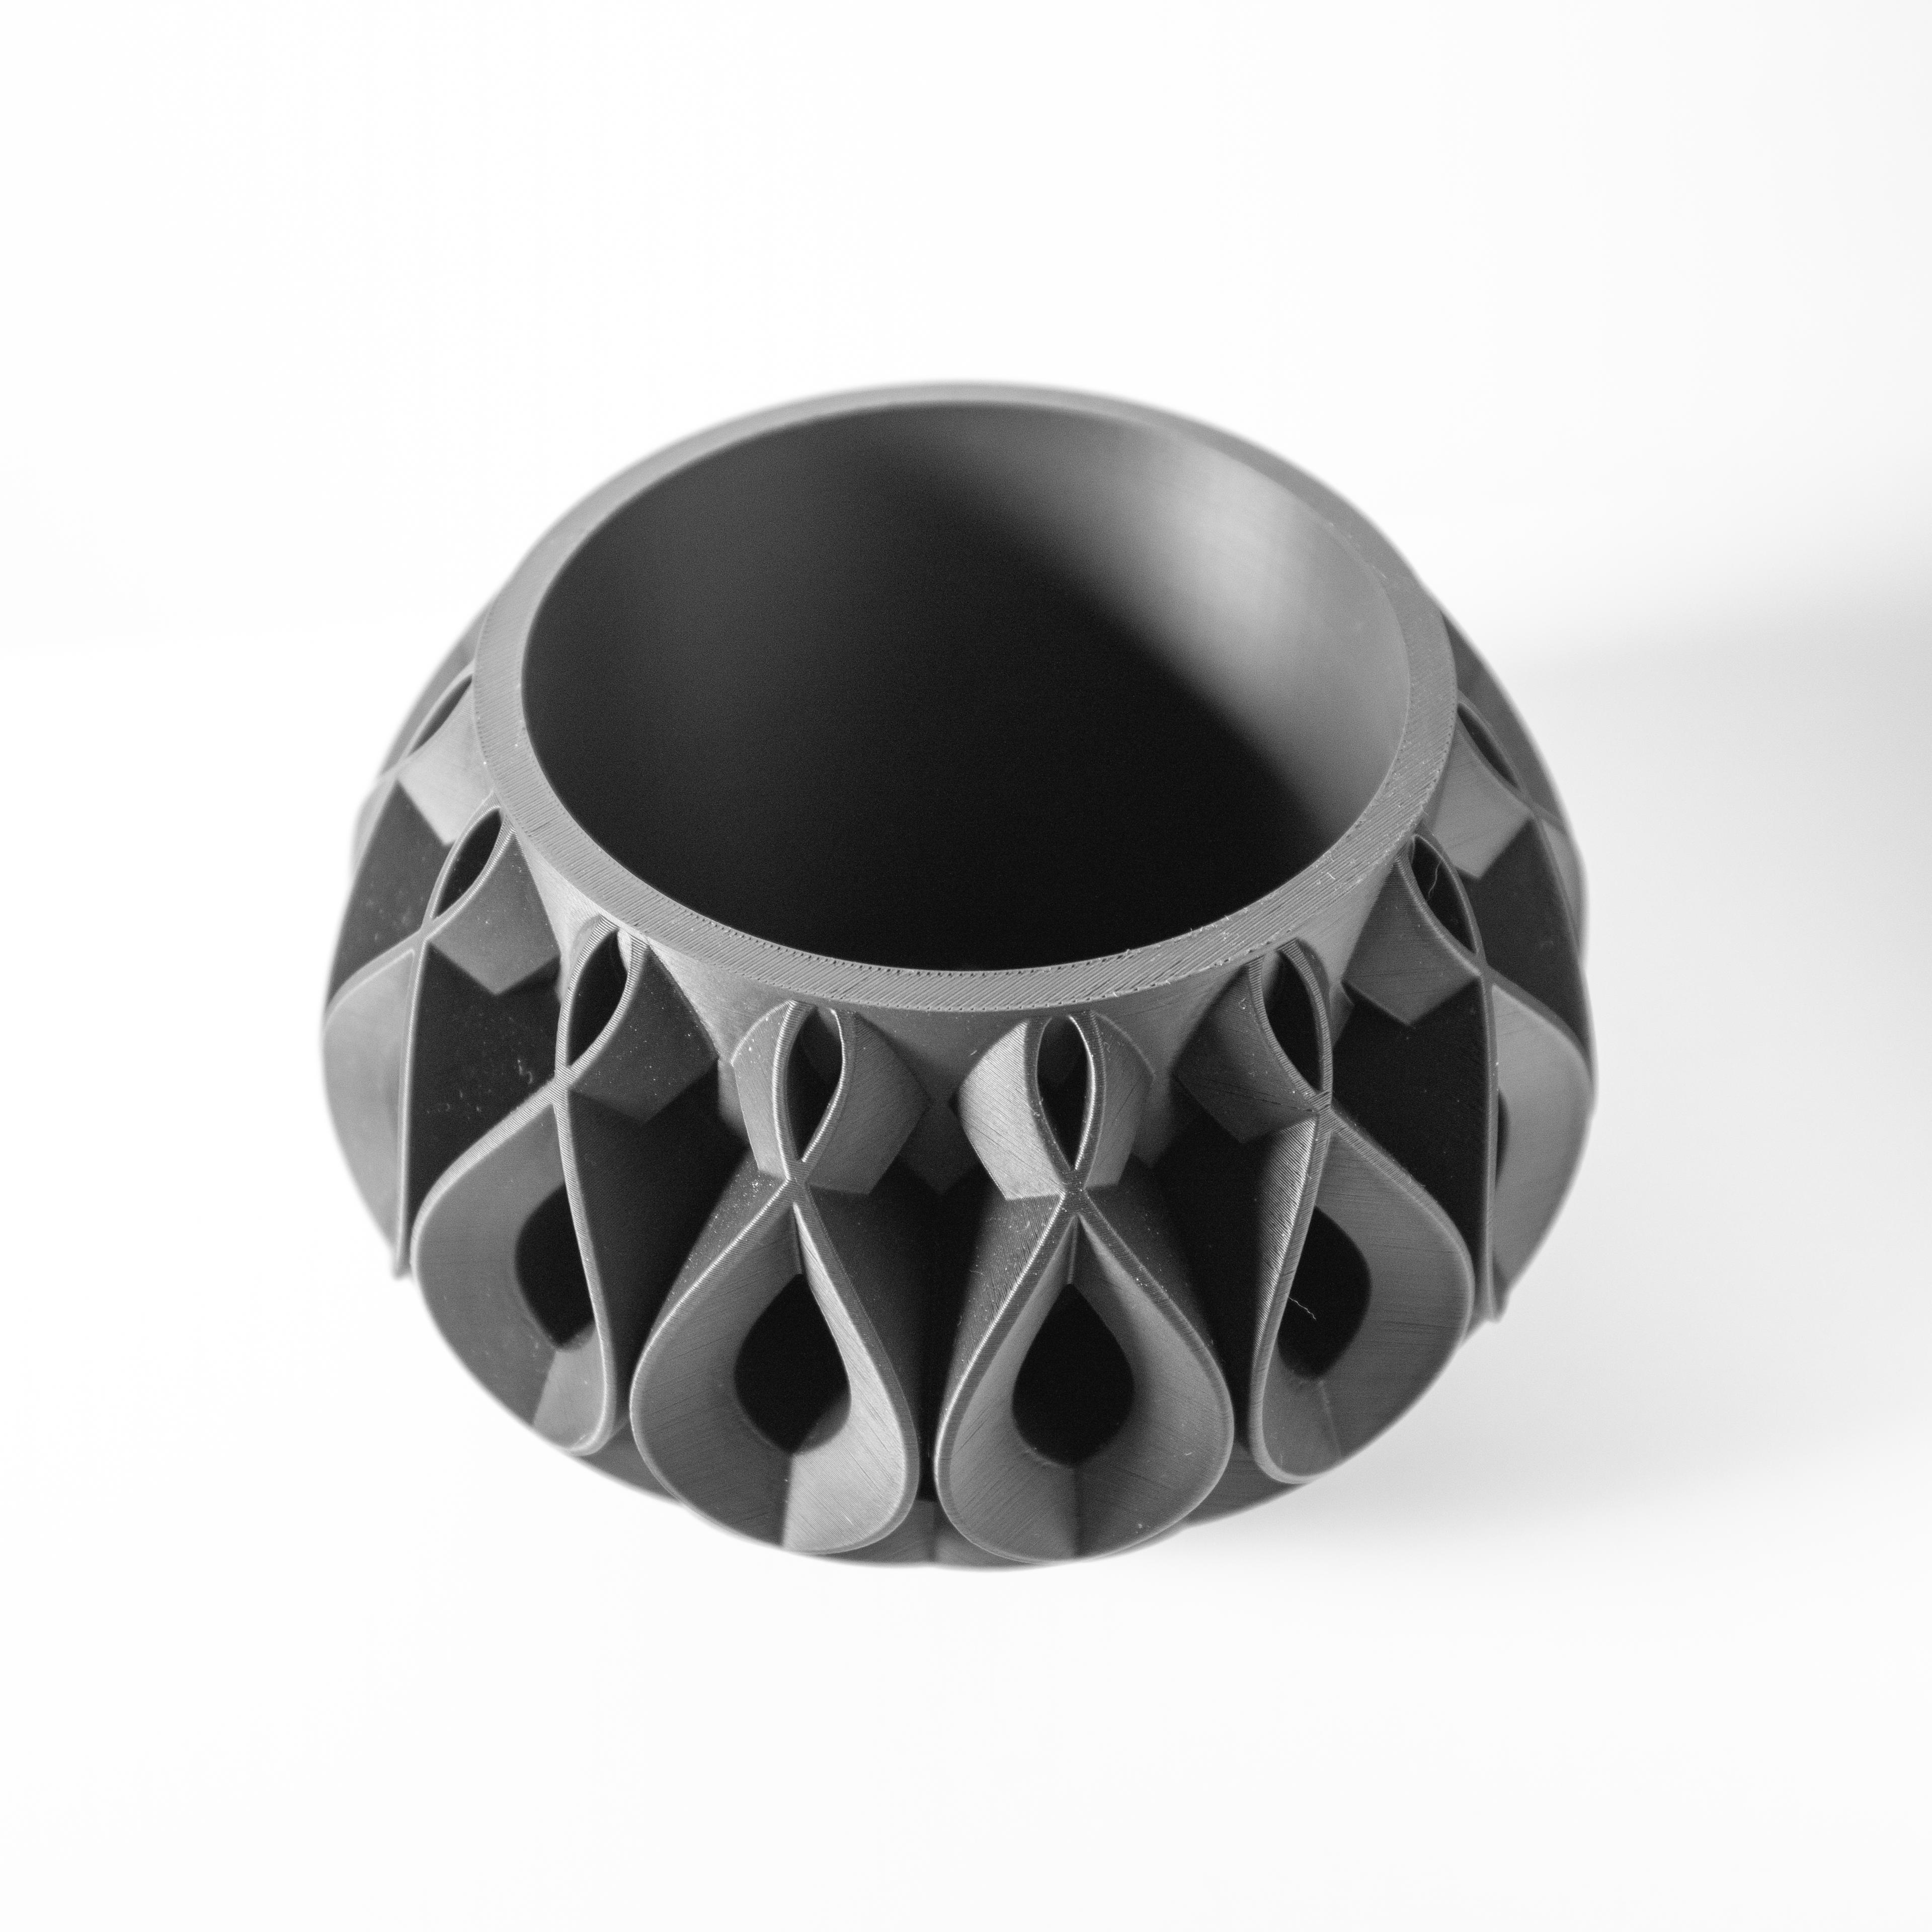 The Viris Planter Pot with Drainage Tray & Stand Included: Modern and Unique Home Decor for Plants 3d model